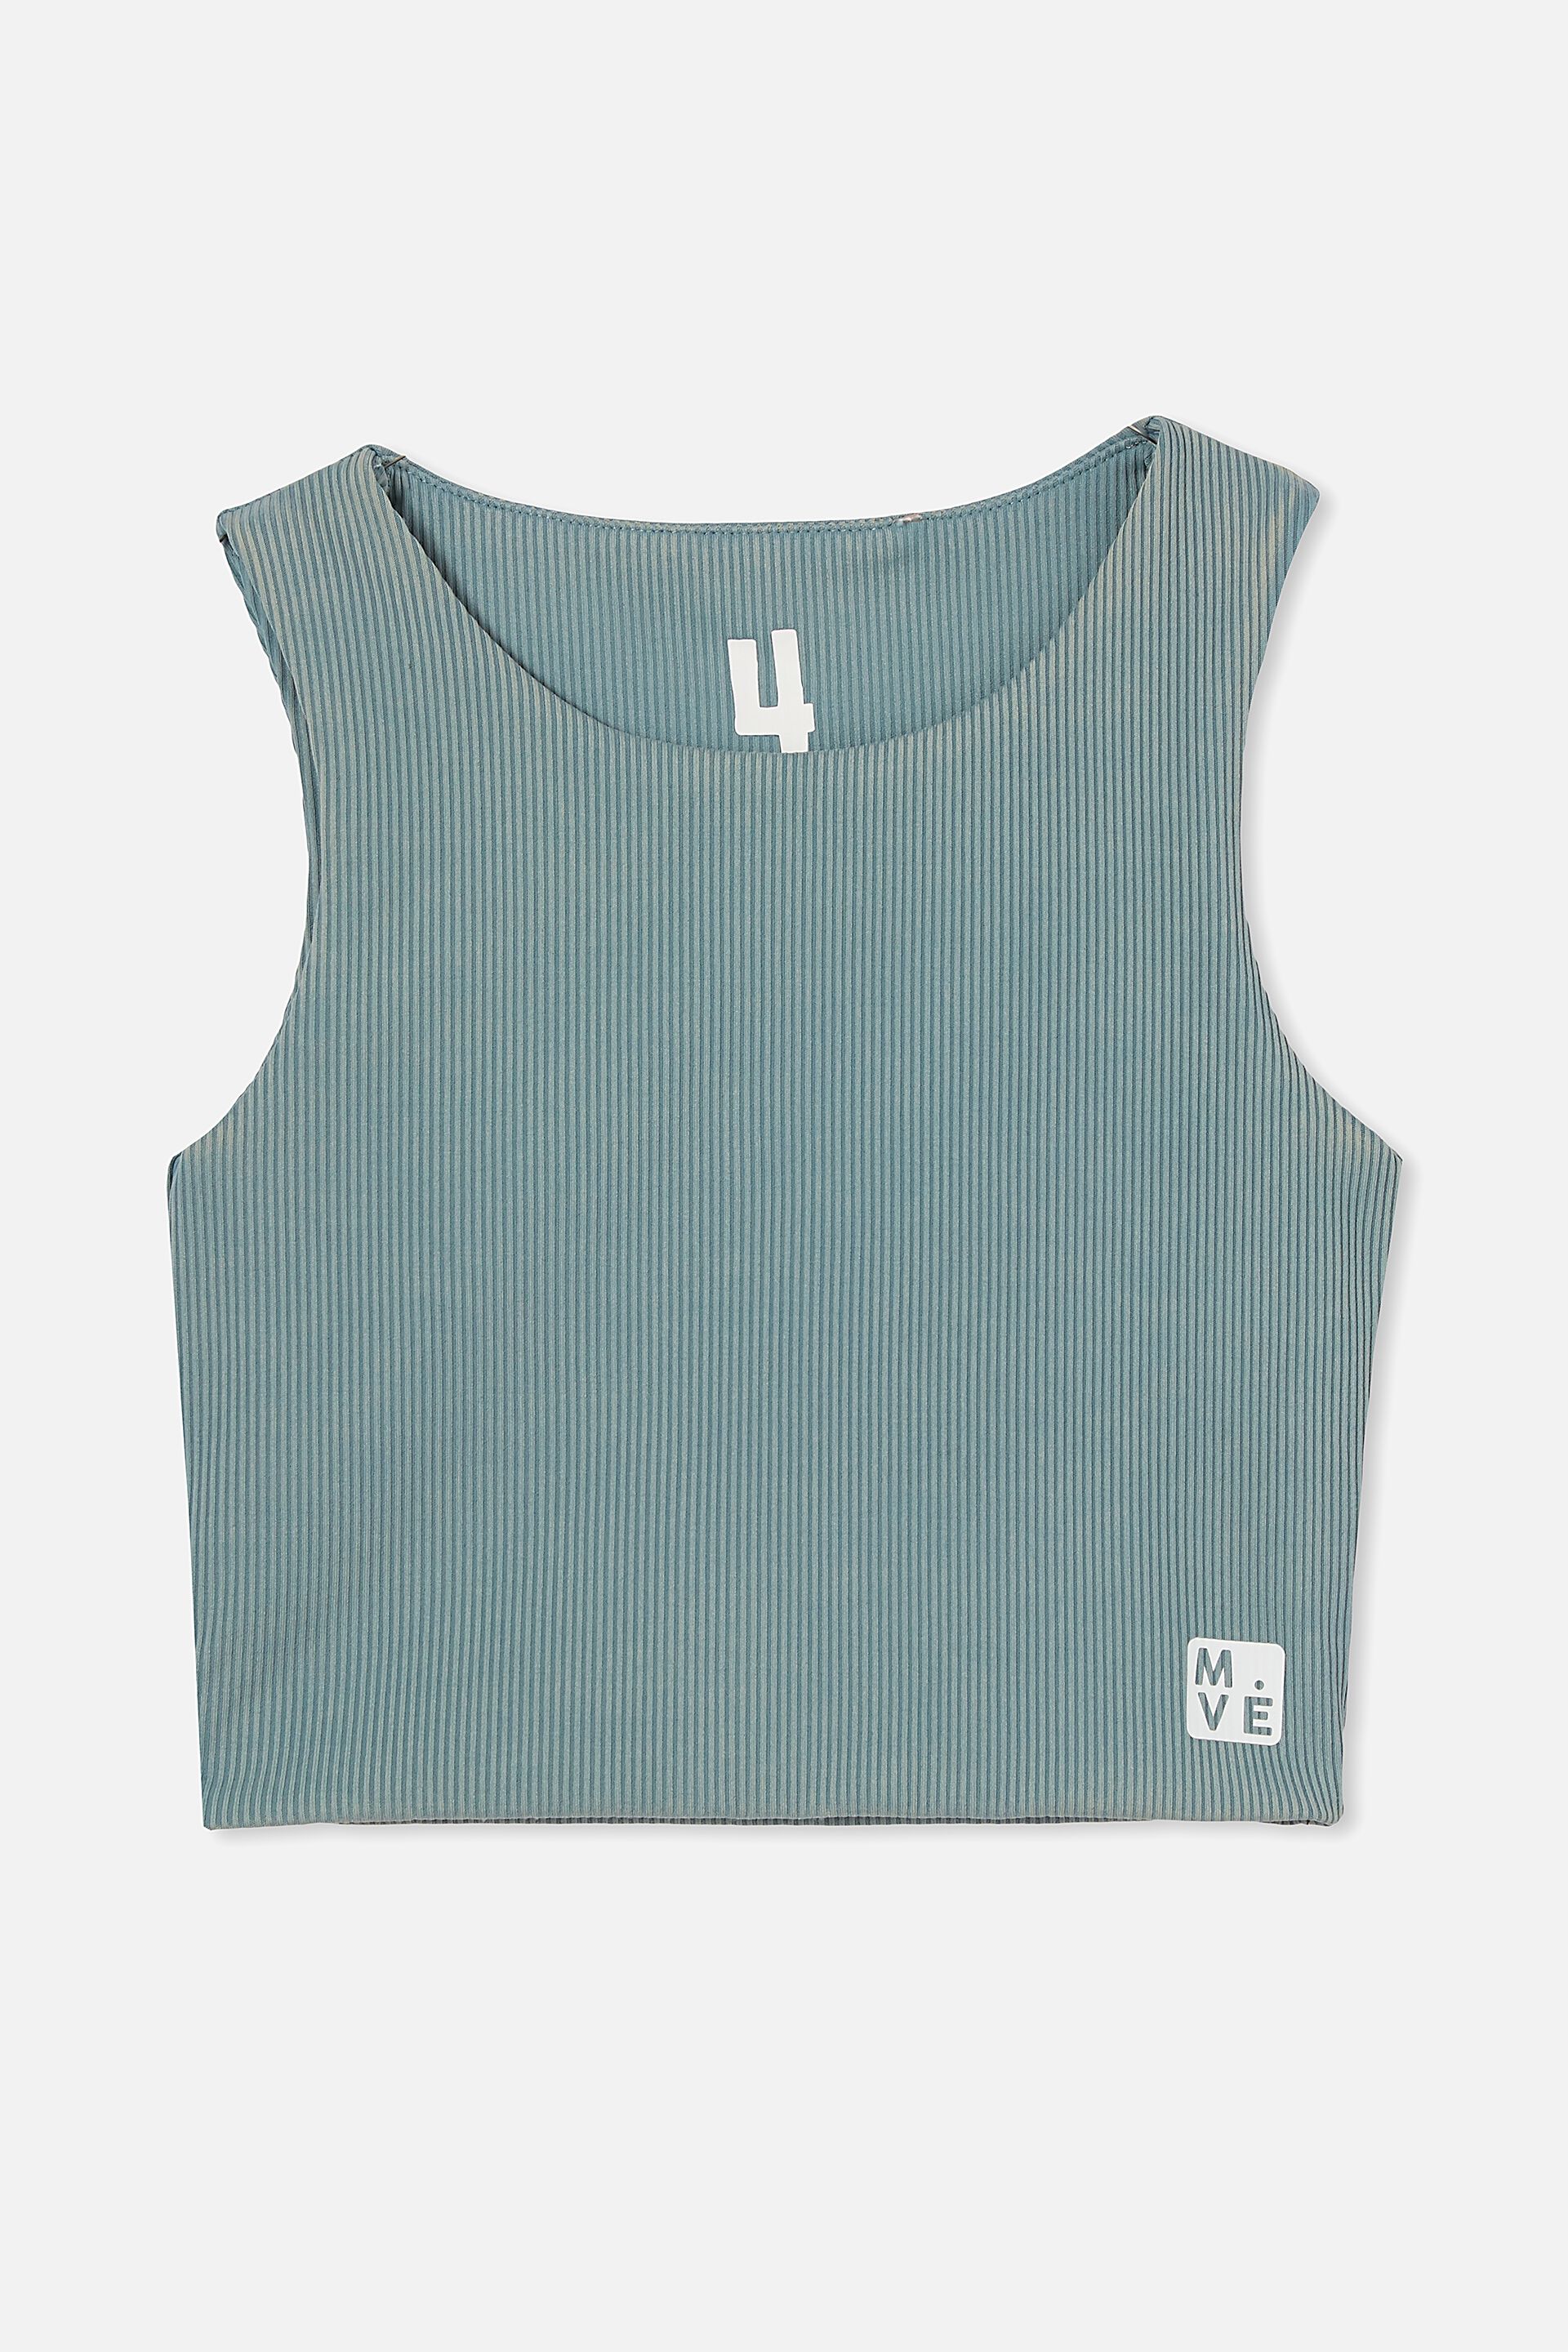 Girls 2-14 Tops & T-Shirts | The High Neck Crop Top - YW43017